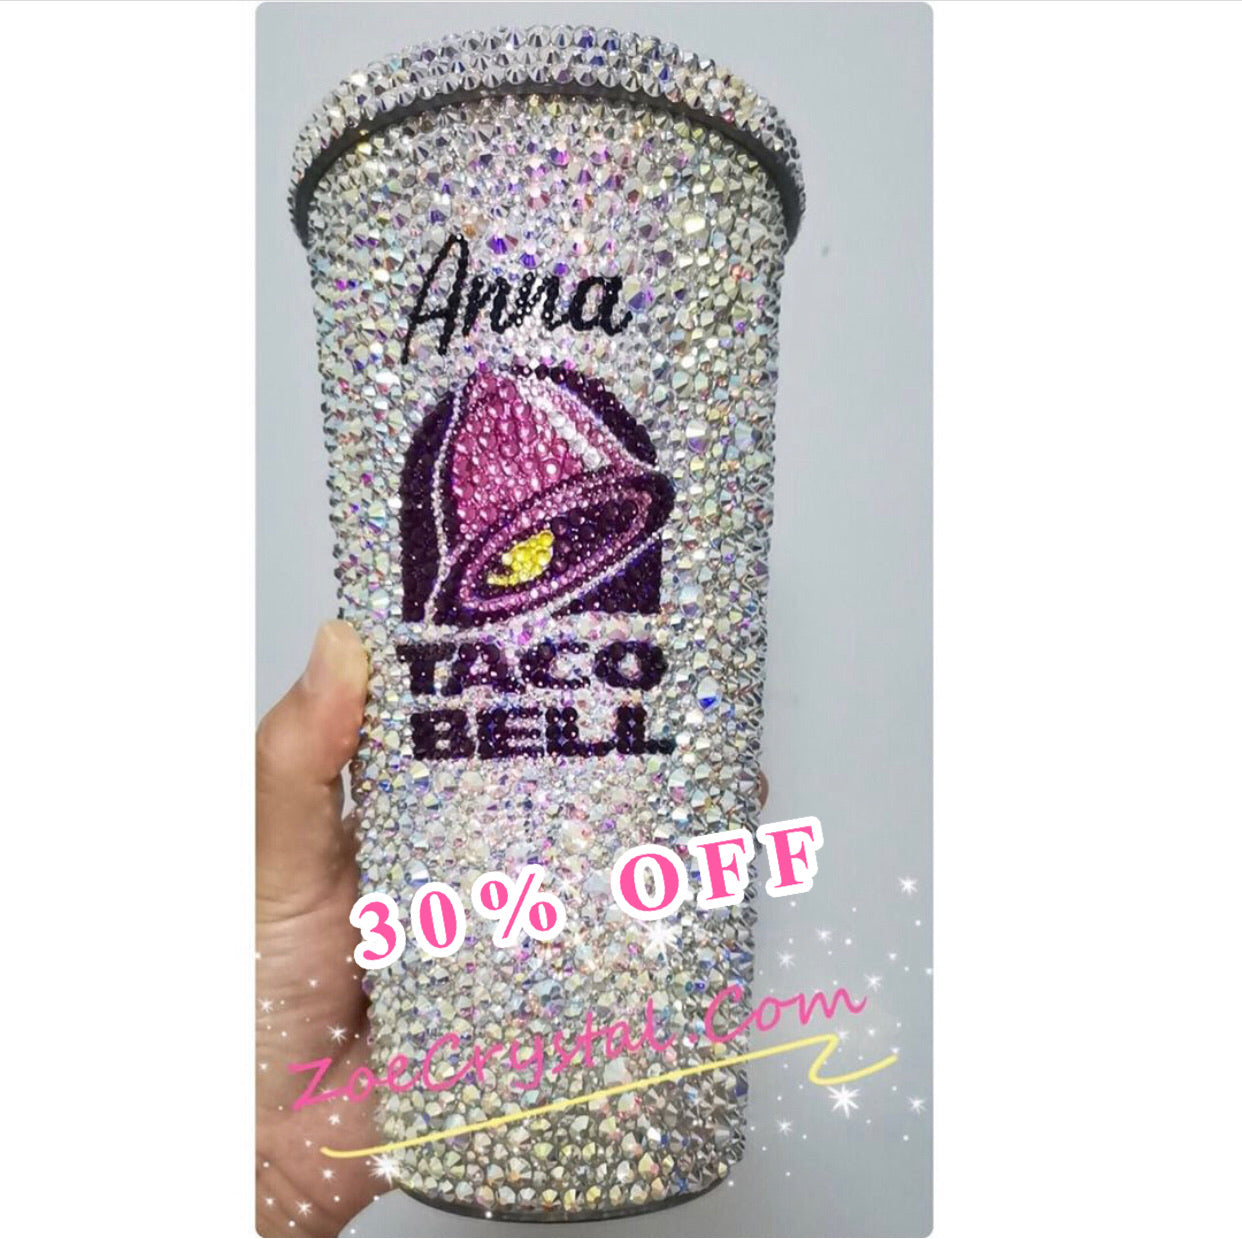 BLING Crystallized Taco bell Cold Cup